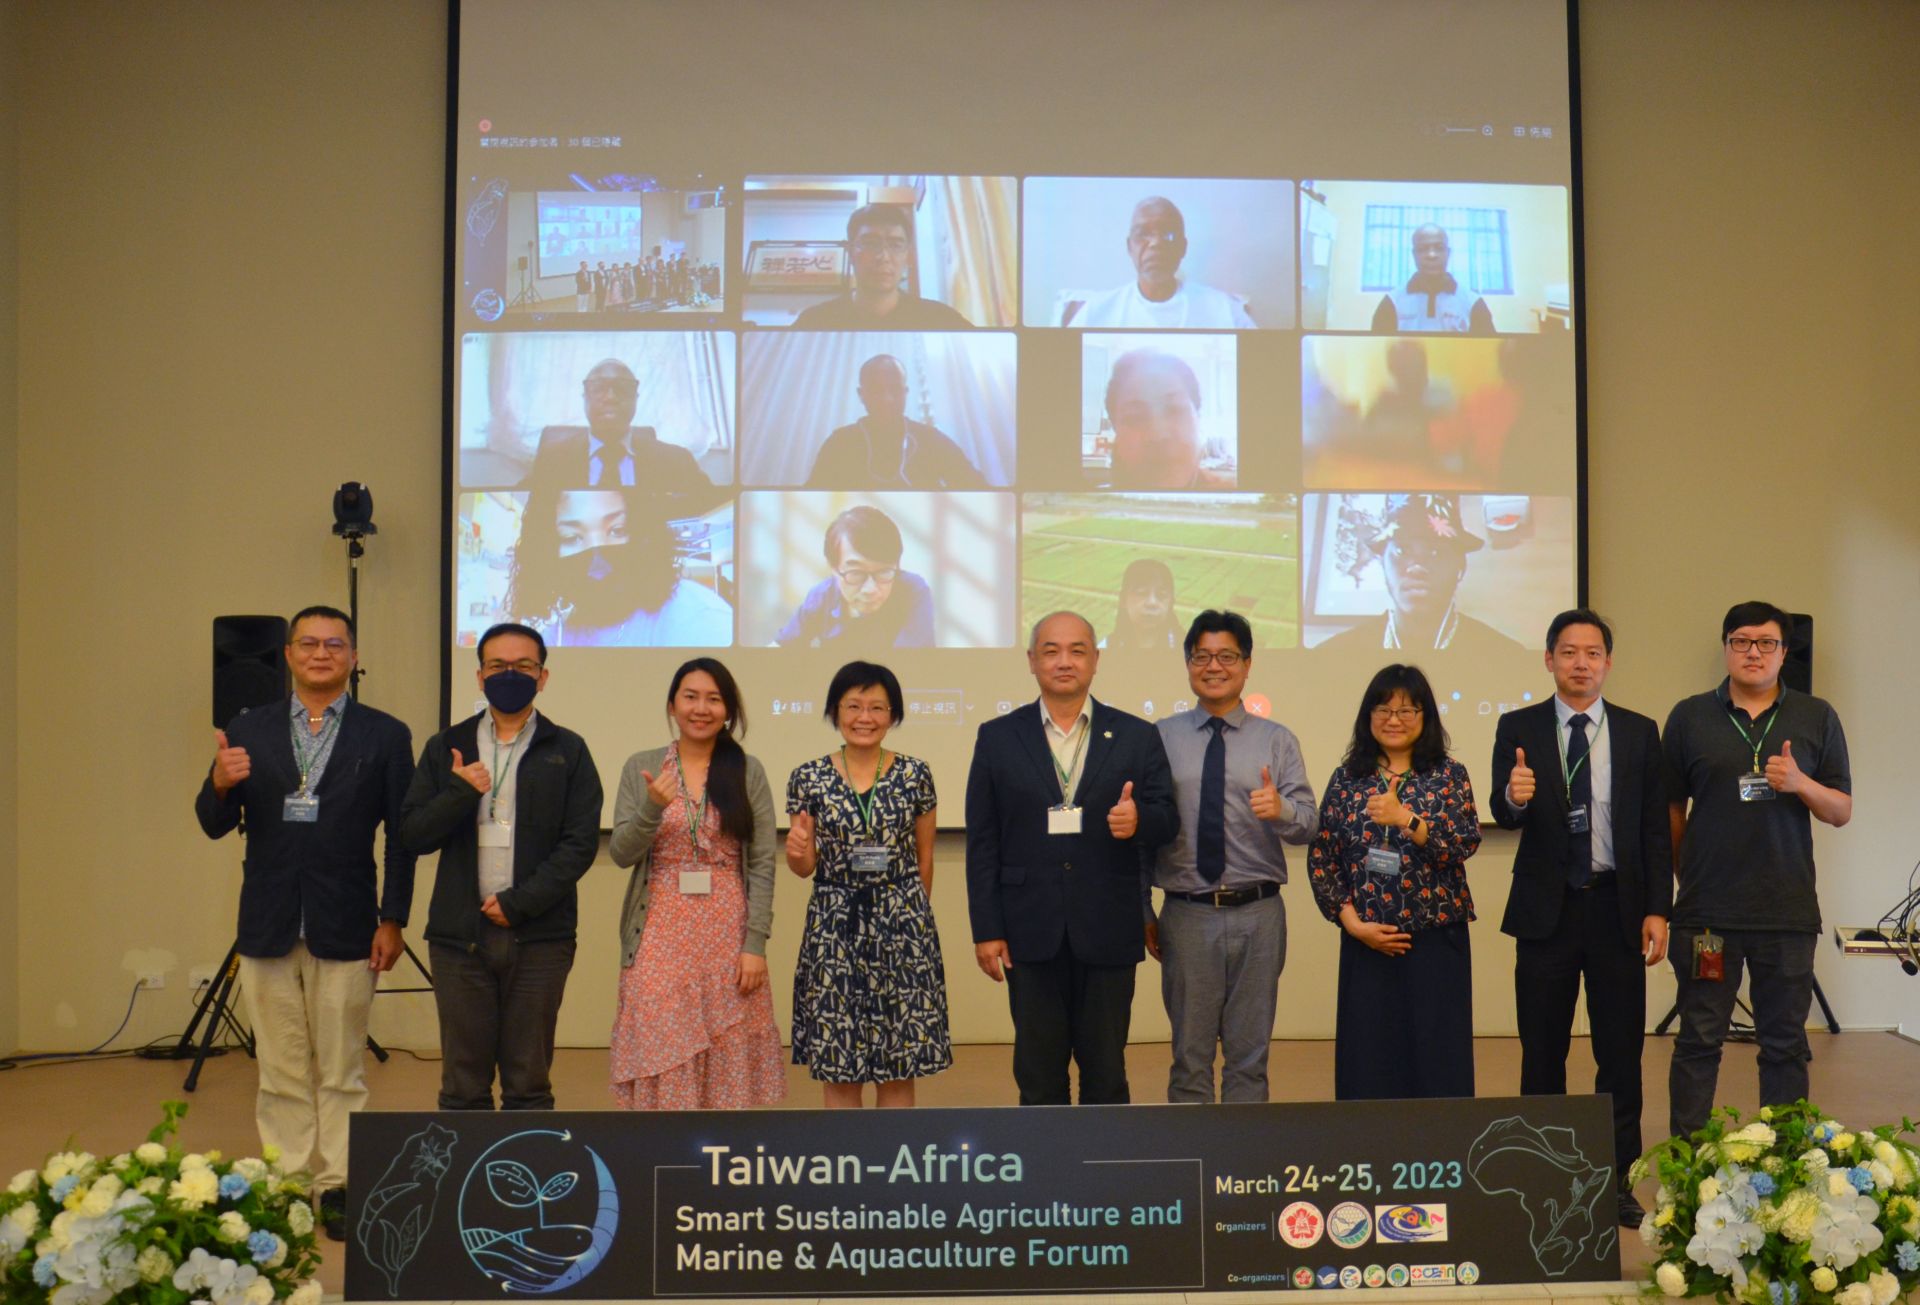 “Taiwan-Africa Smart Sustainable Agriculture and Marine & Aquaculture Forum” held in NCKU